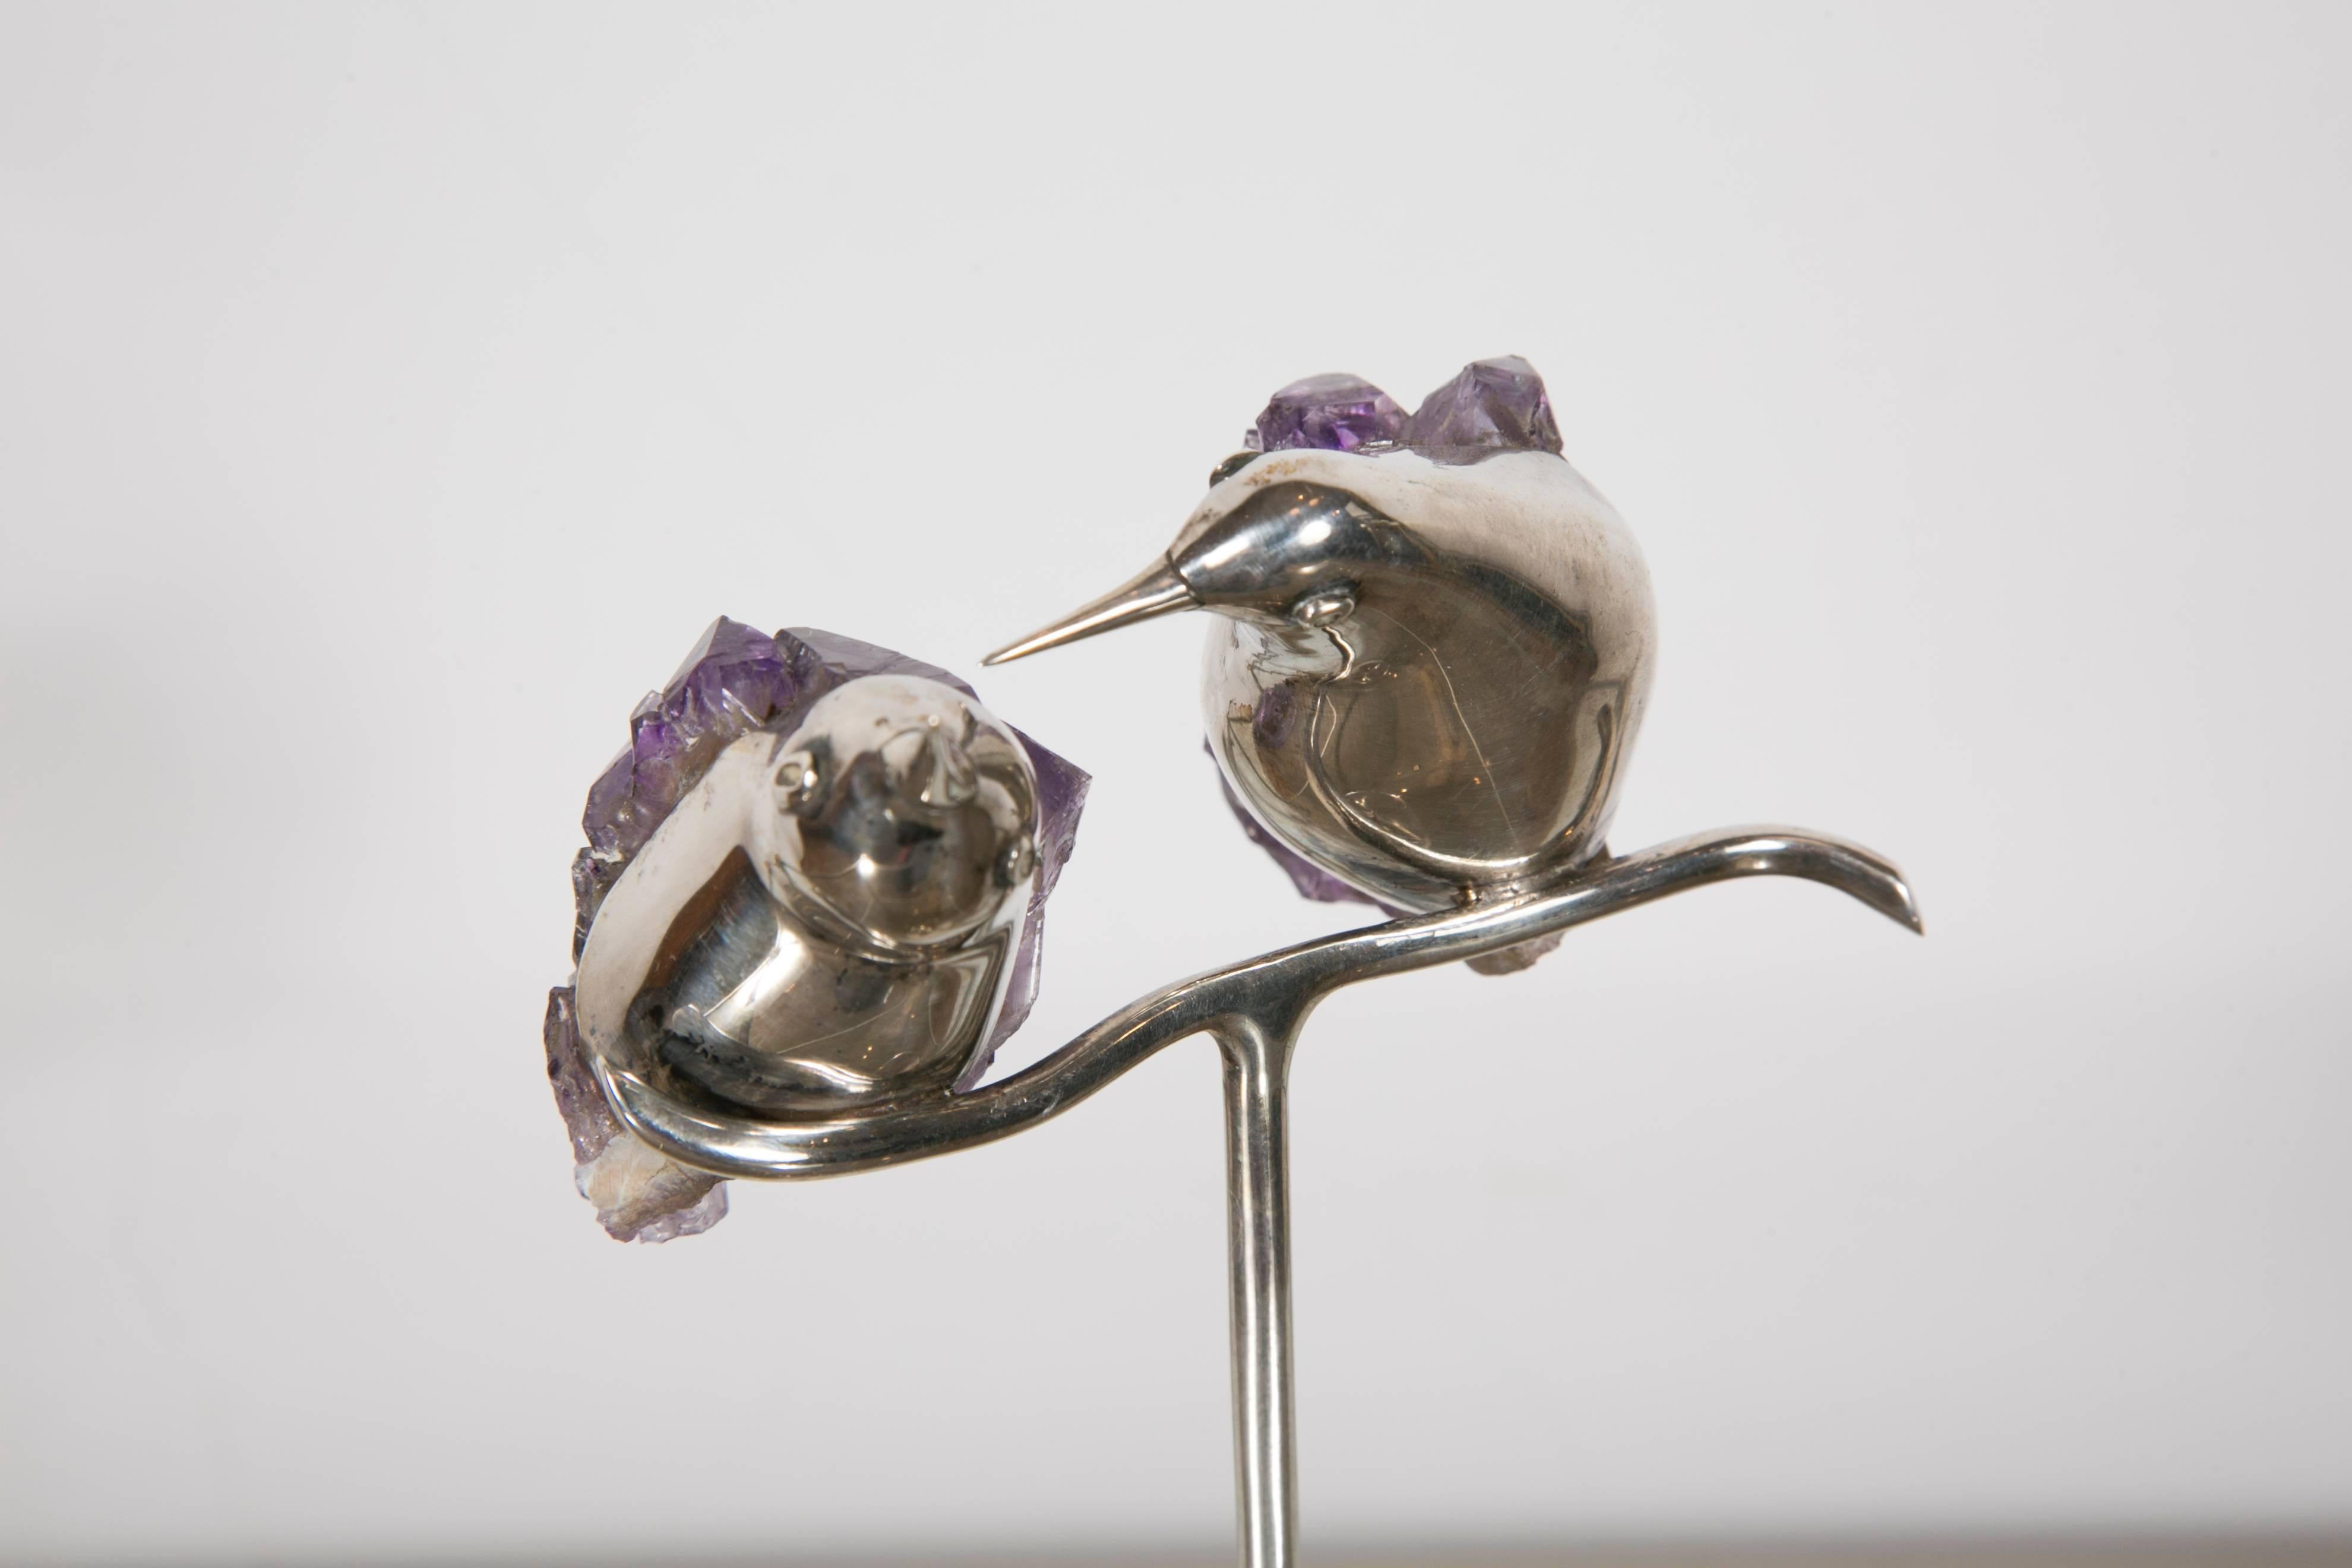 Sterling Silver Charming Pair of Silver and Amethyst Hummingbird Perched on a Stem